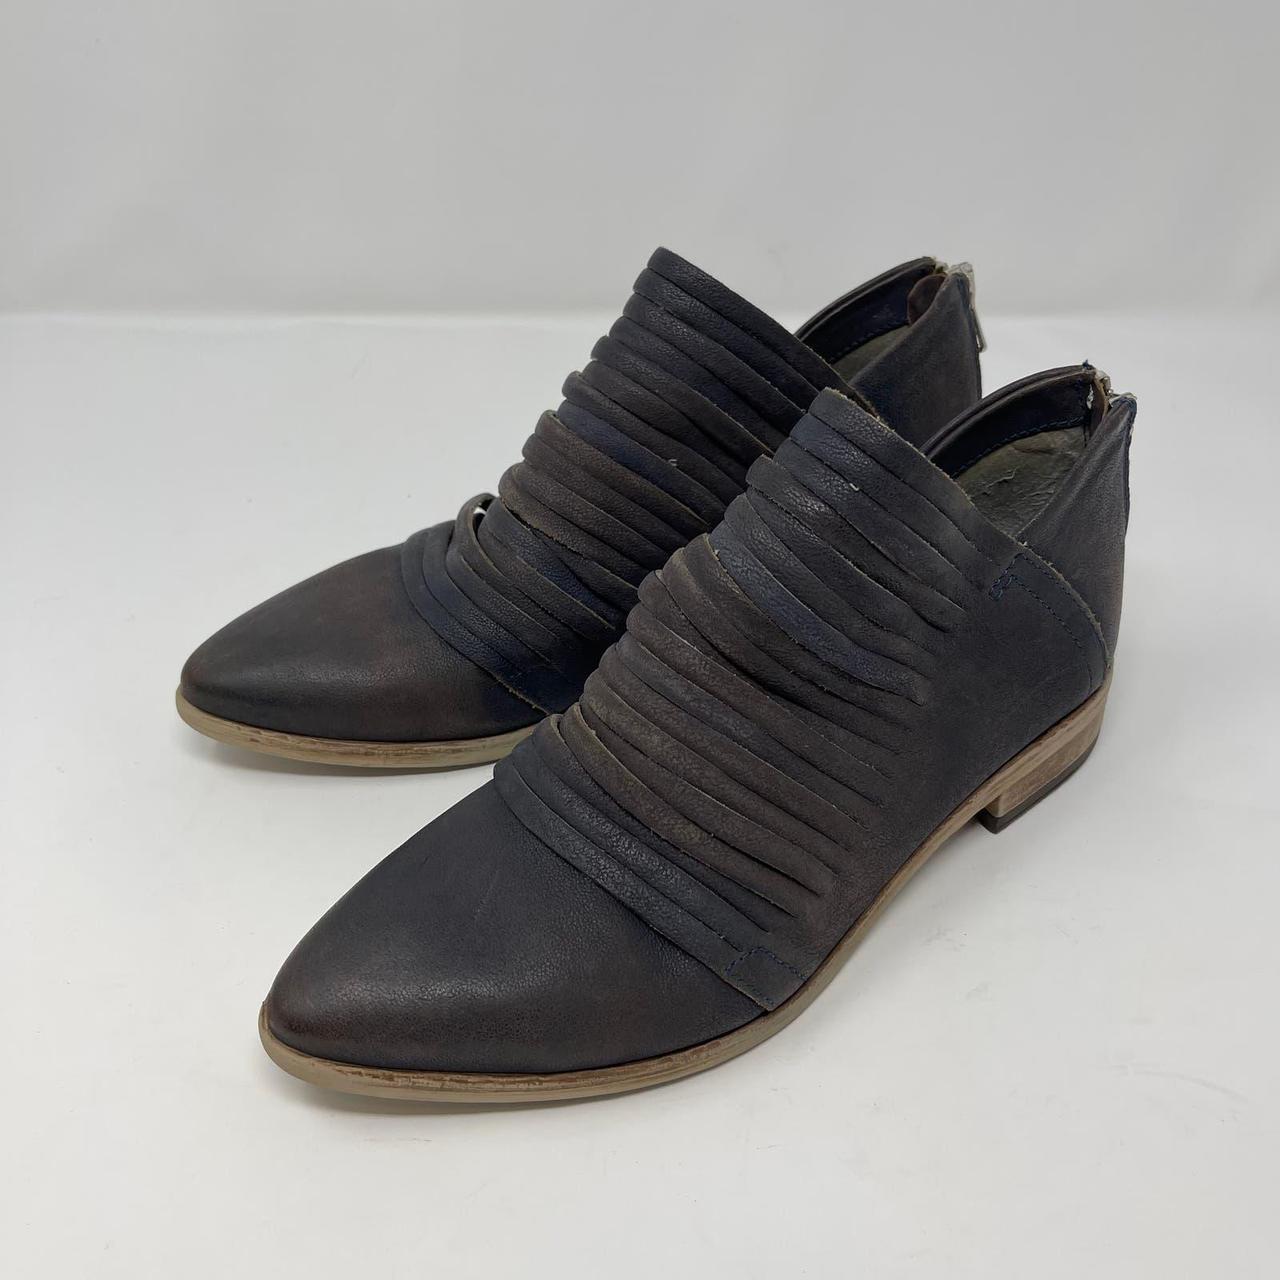 Lost Valley Ankle Boot